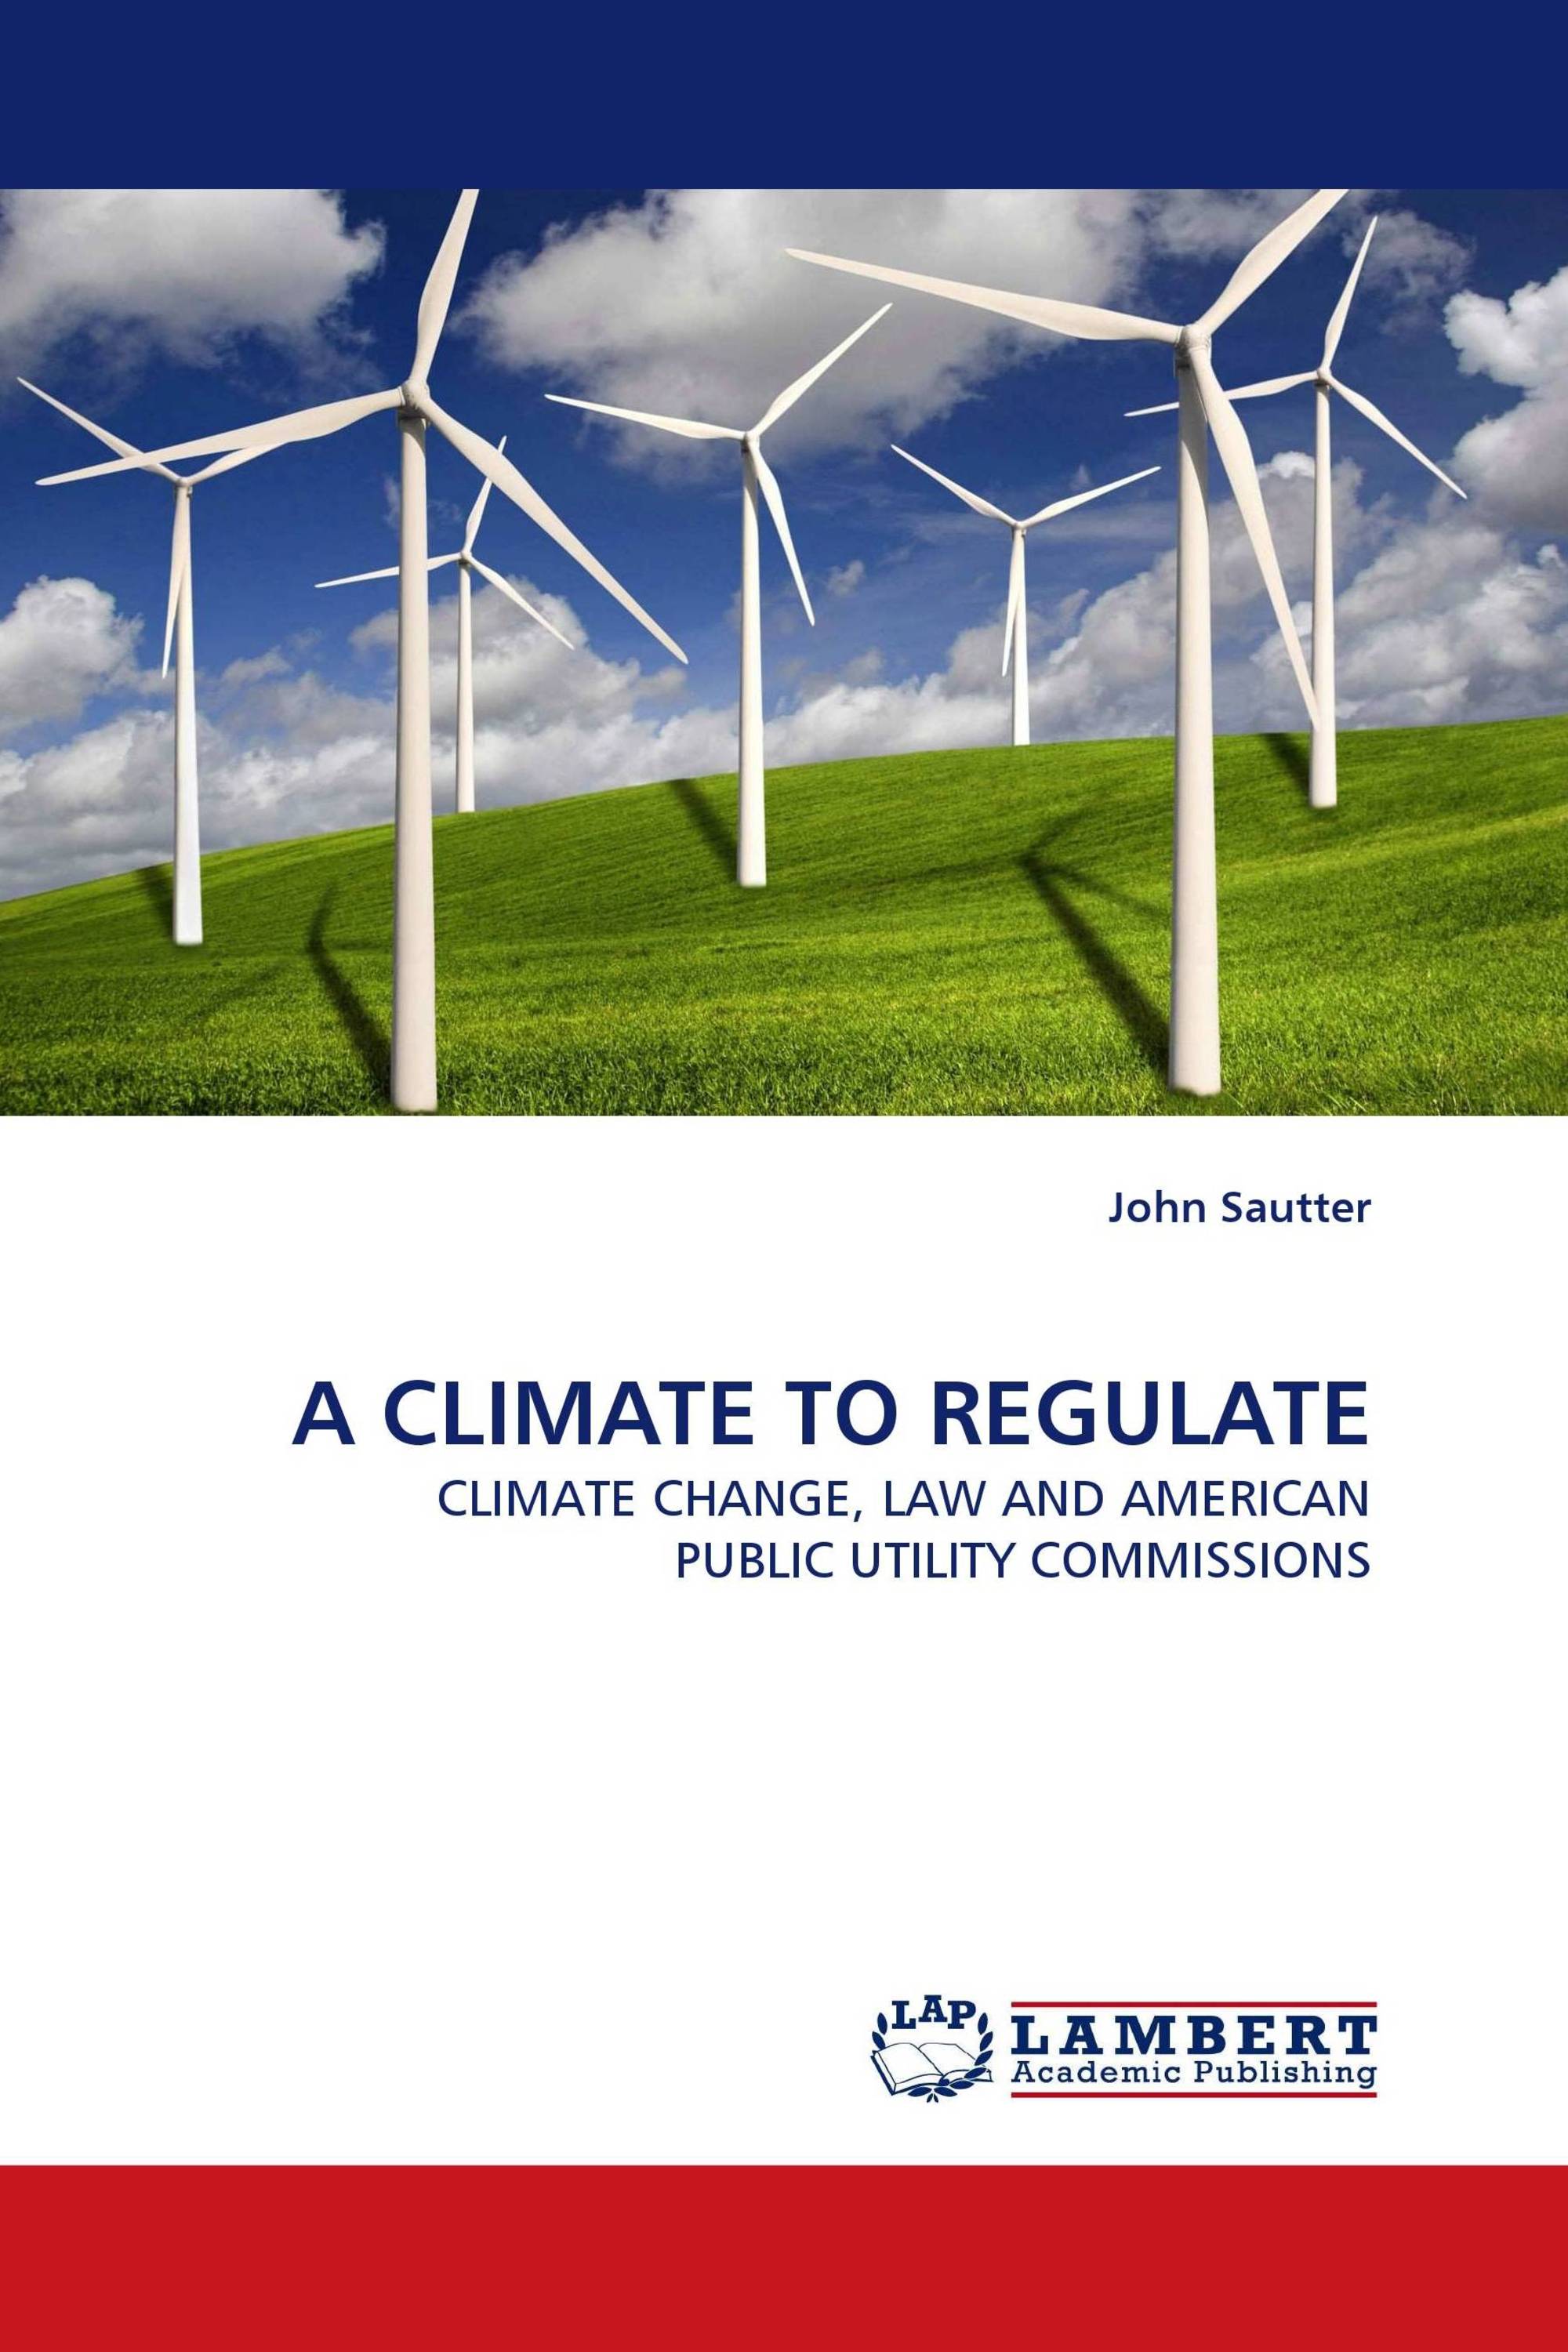 A CLIMATE TO REGULATE